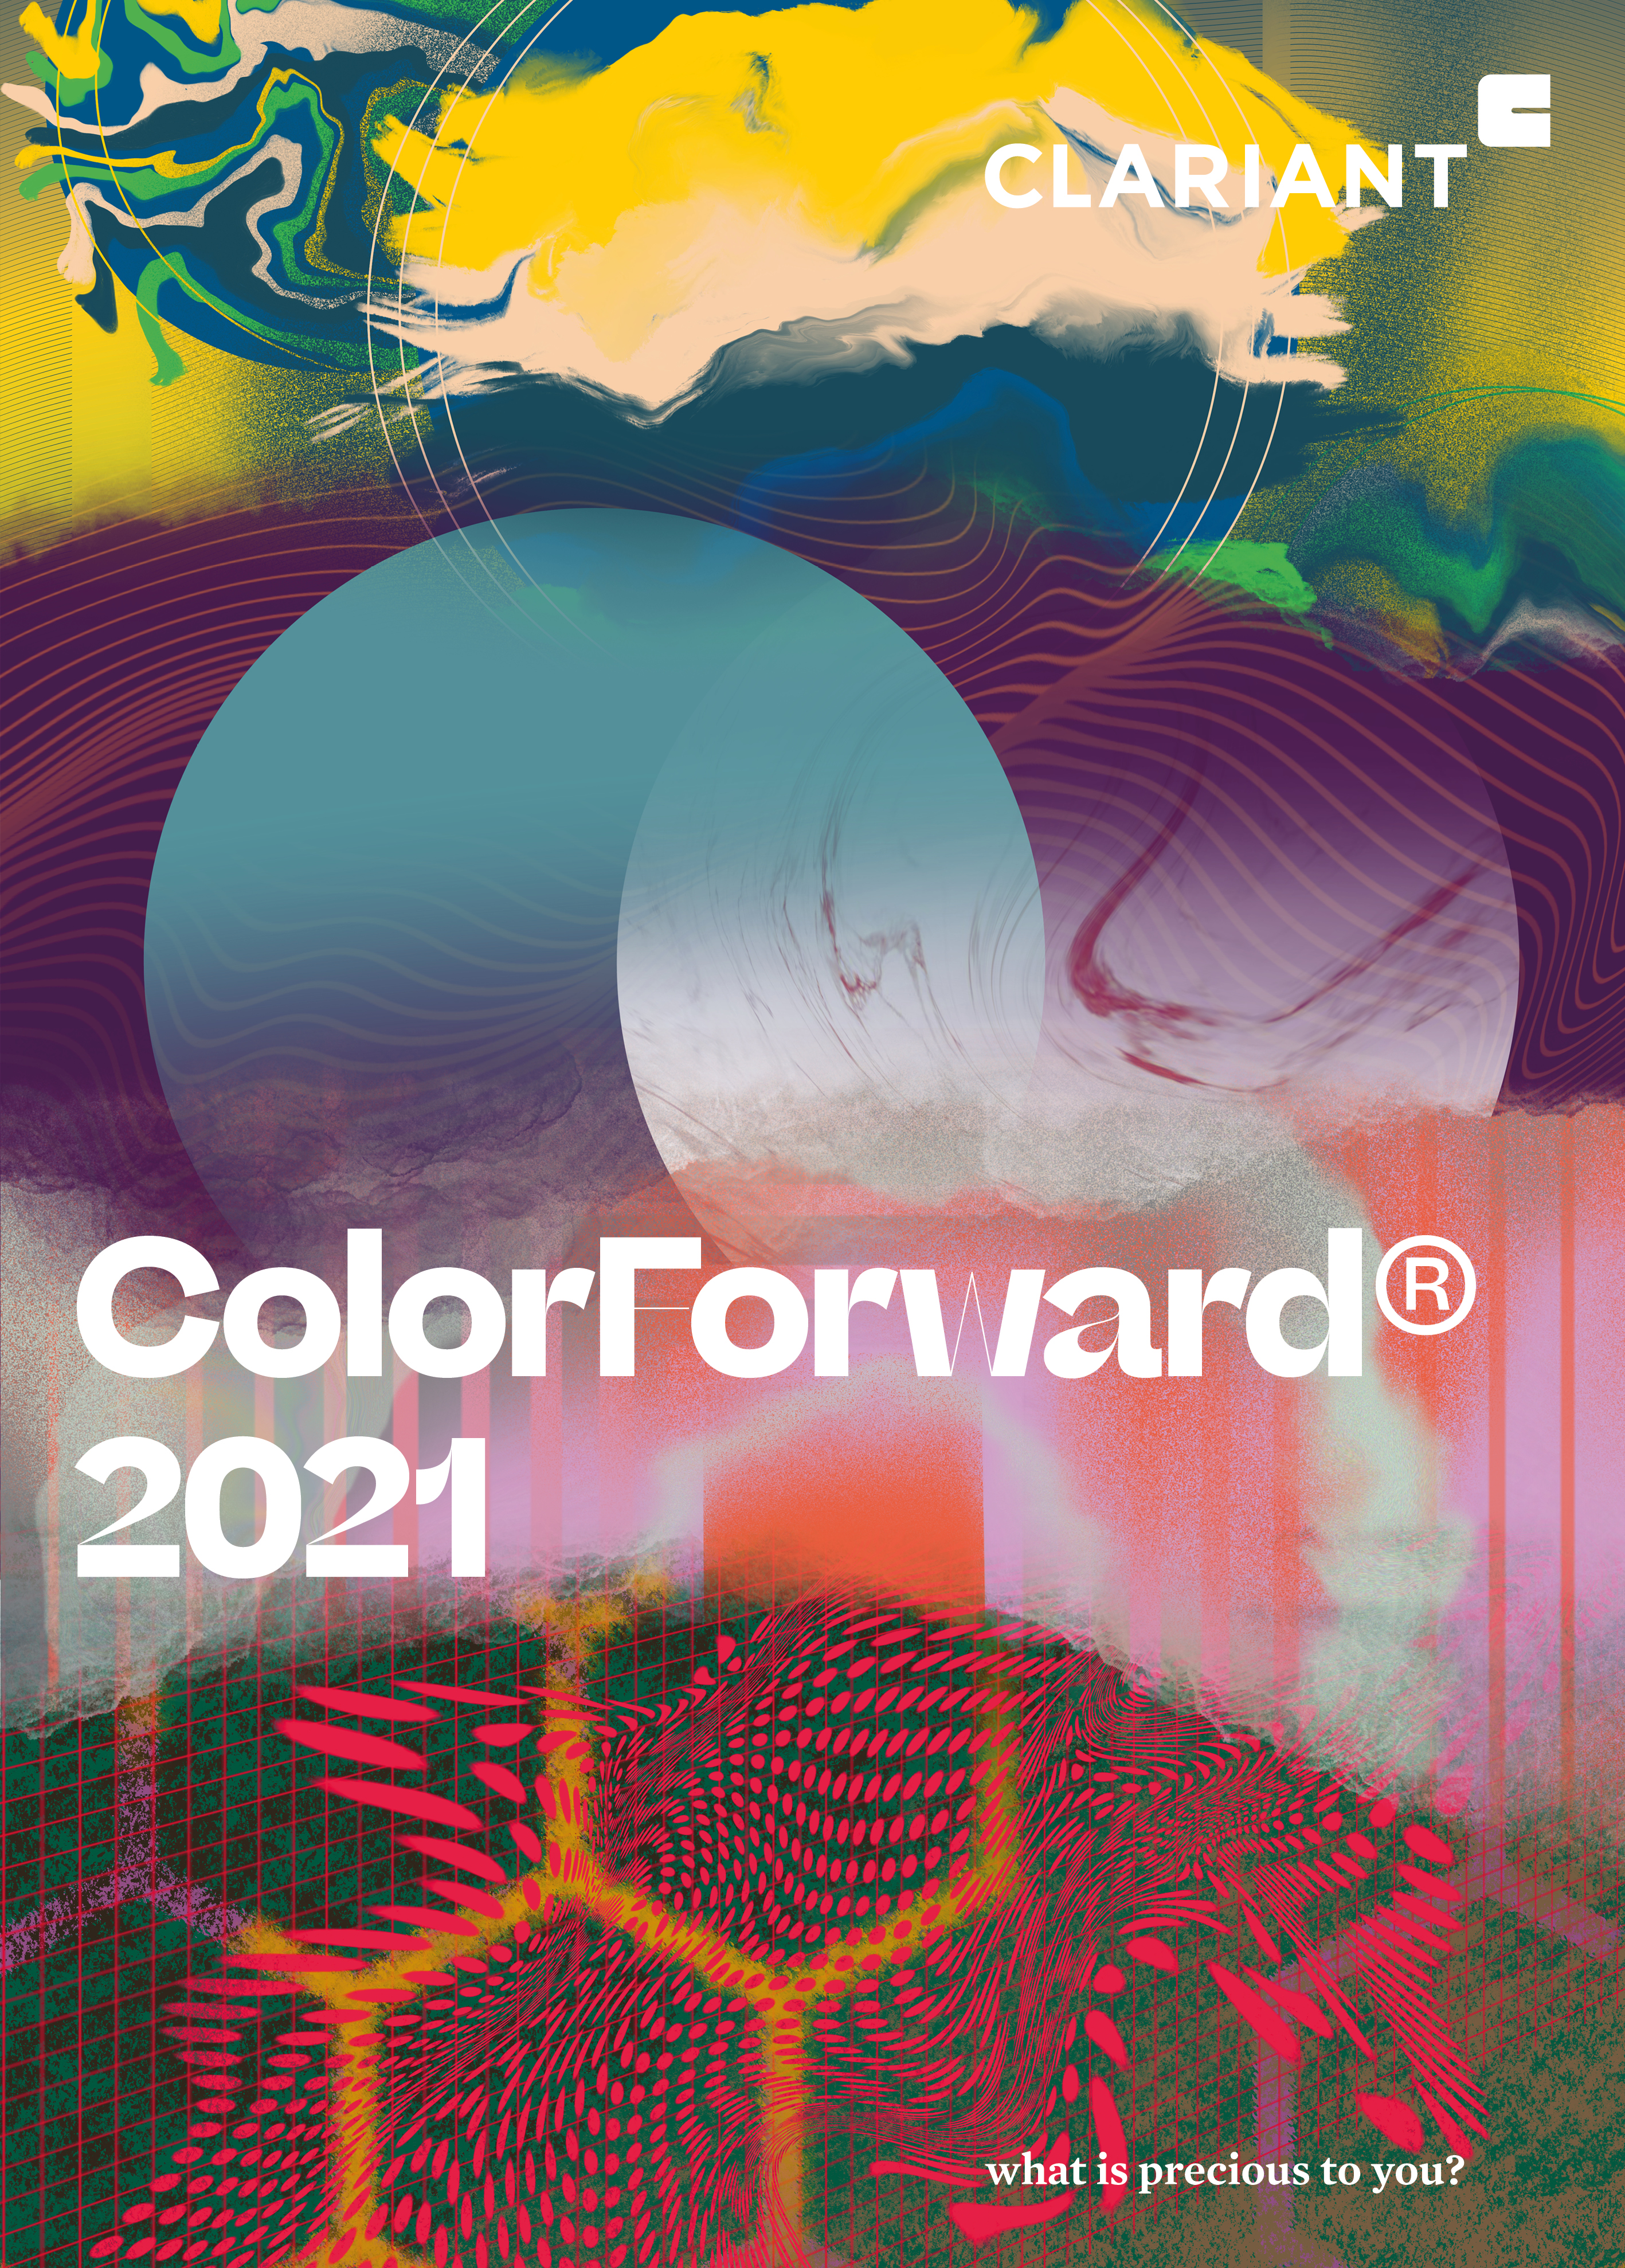 Clariant ColorForward® 2021 Palette Yearns for Human Contact, Searches for Authenticity. 
(Photo:...